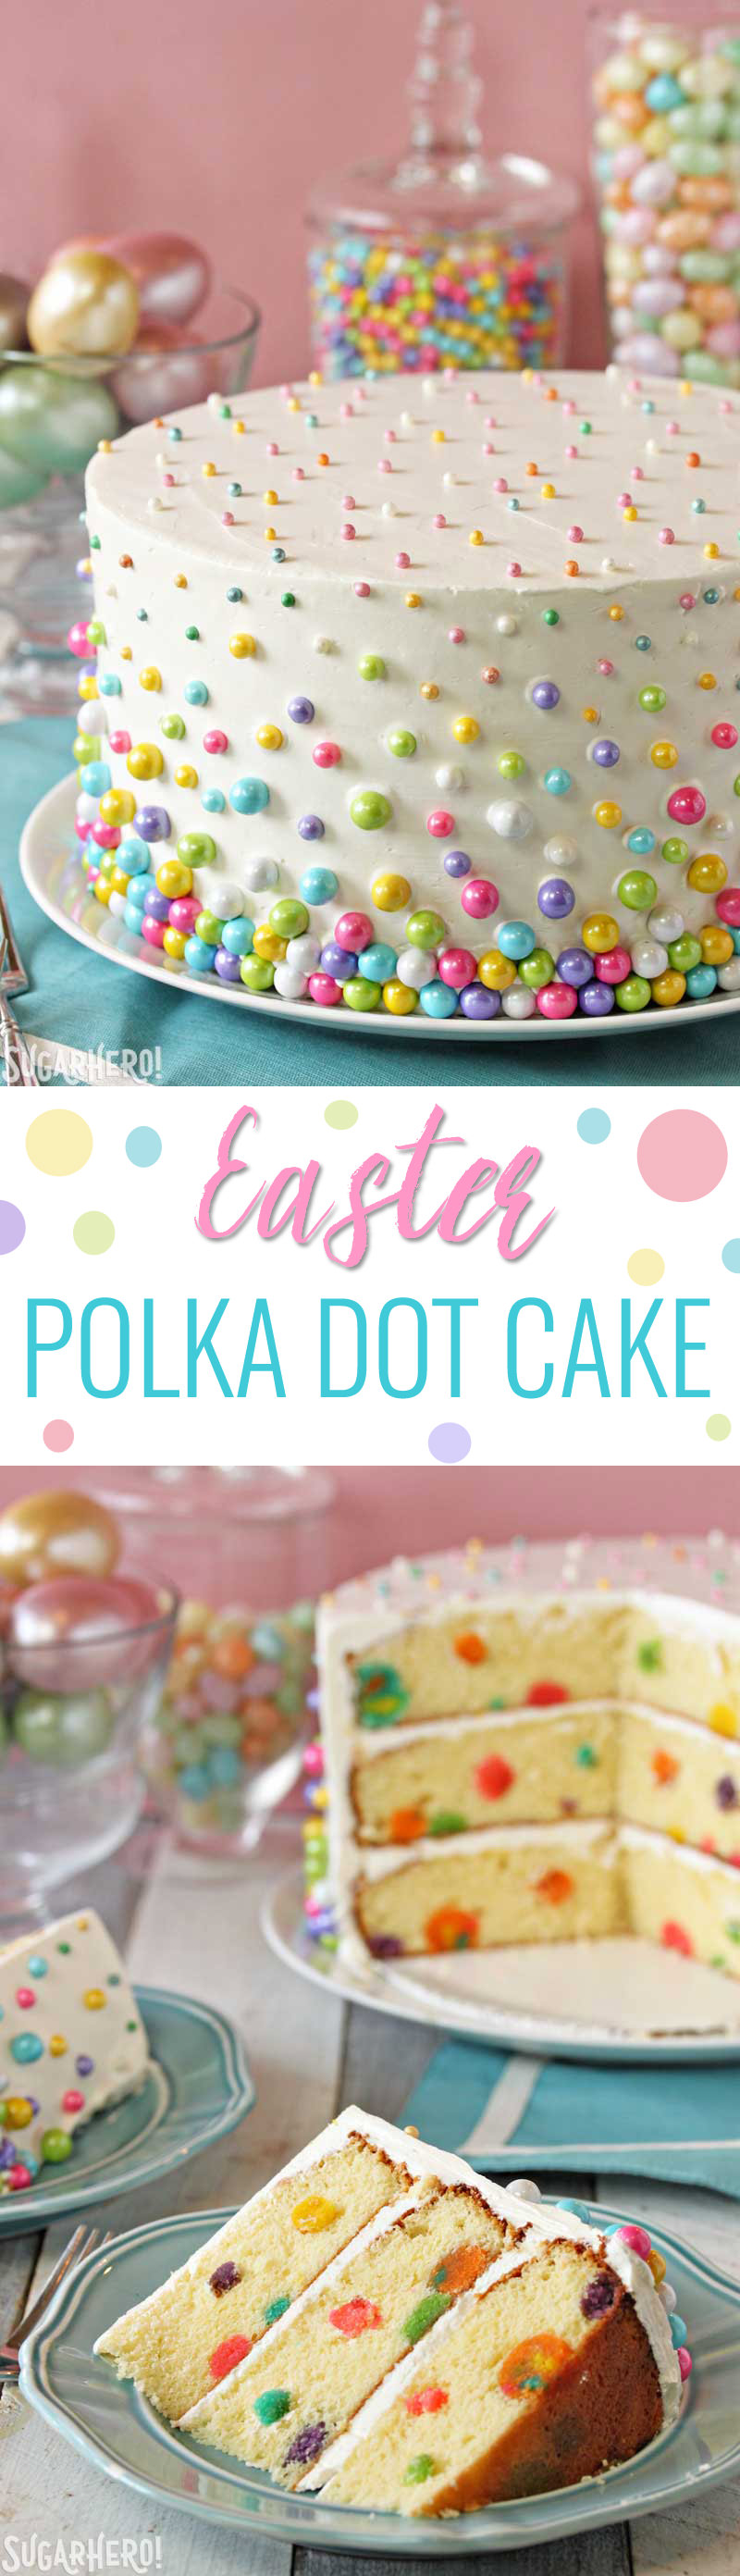 Easter Polka Dot Cake - a spring cake with polka dots on the outside AND inside of the cake! | From SugarHero.com